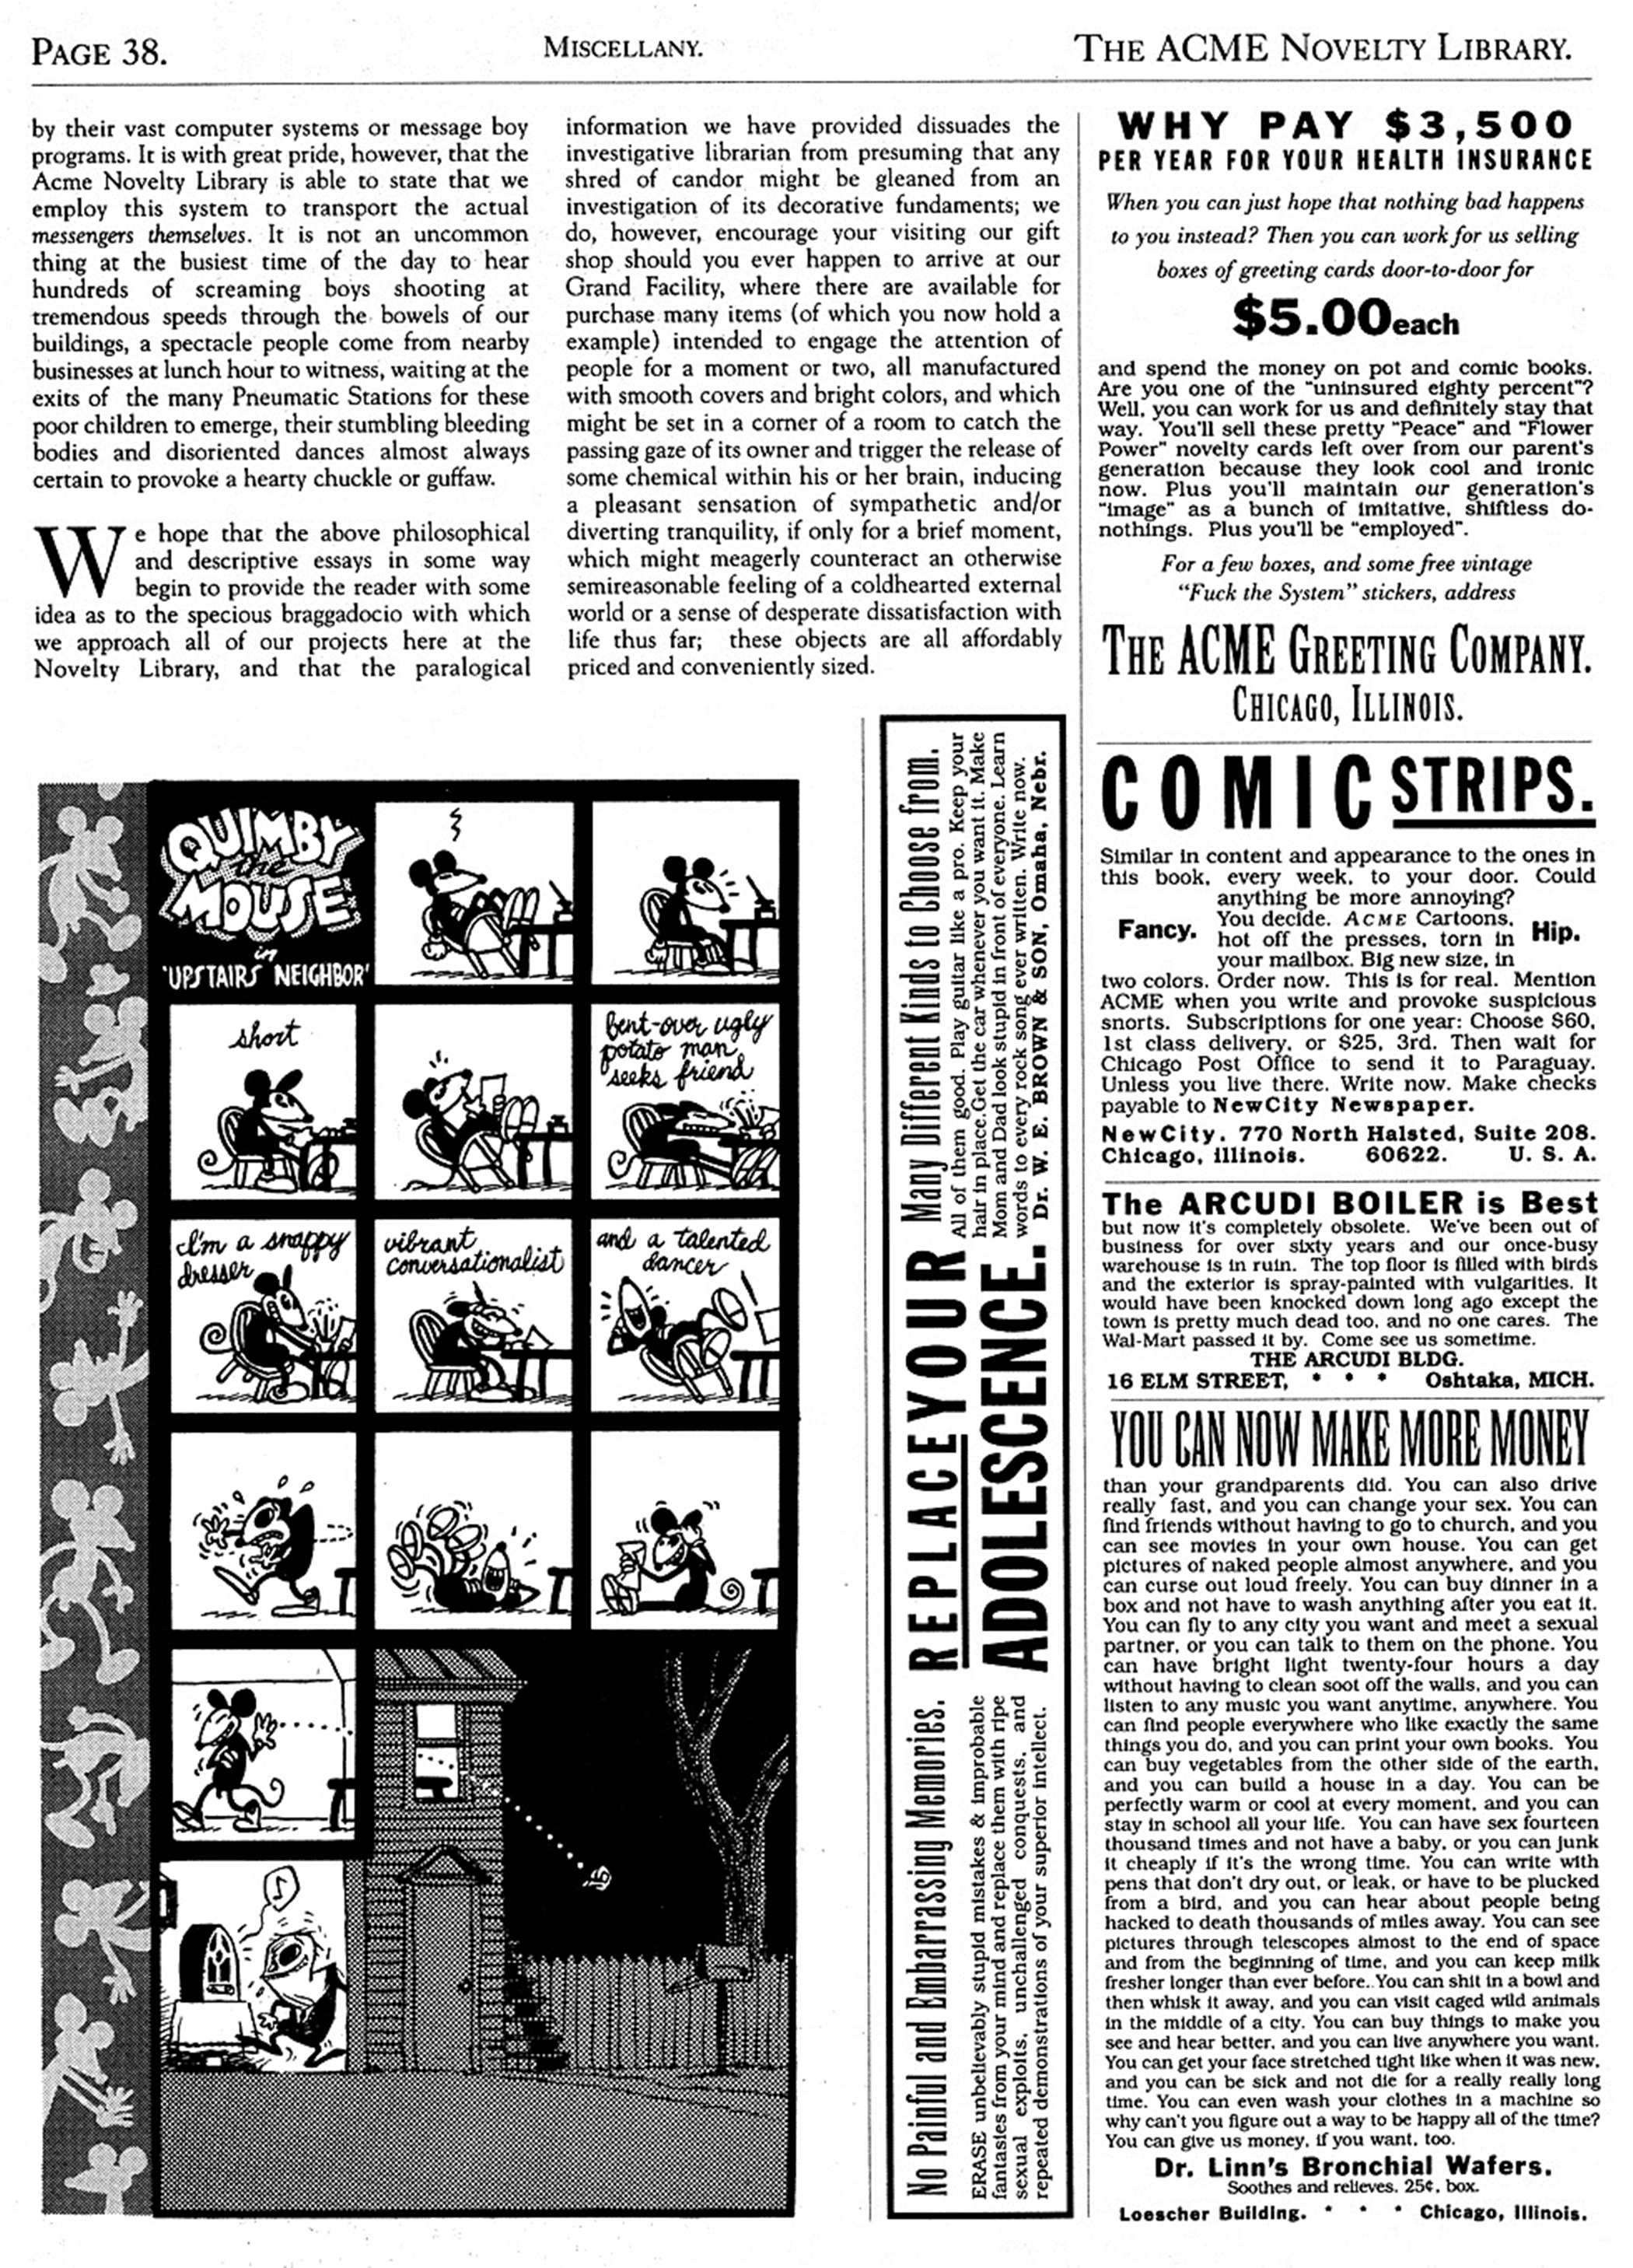 Read online The Acme Novelty Library comic -  Issue #3 - 38